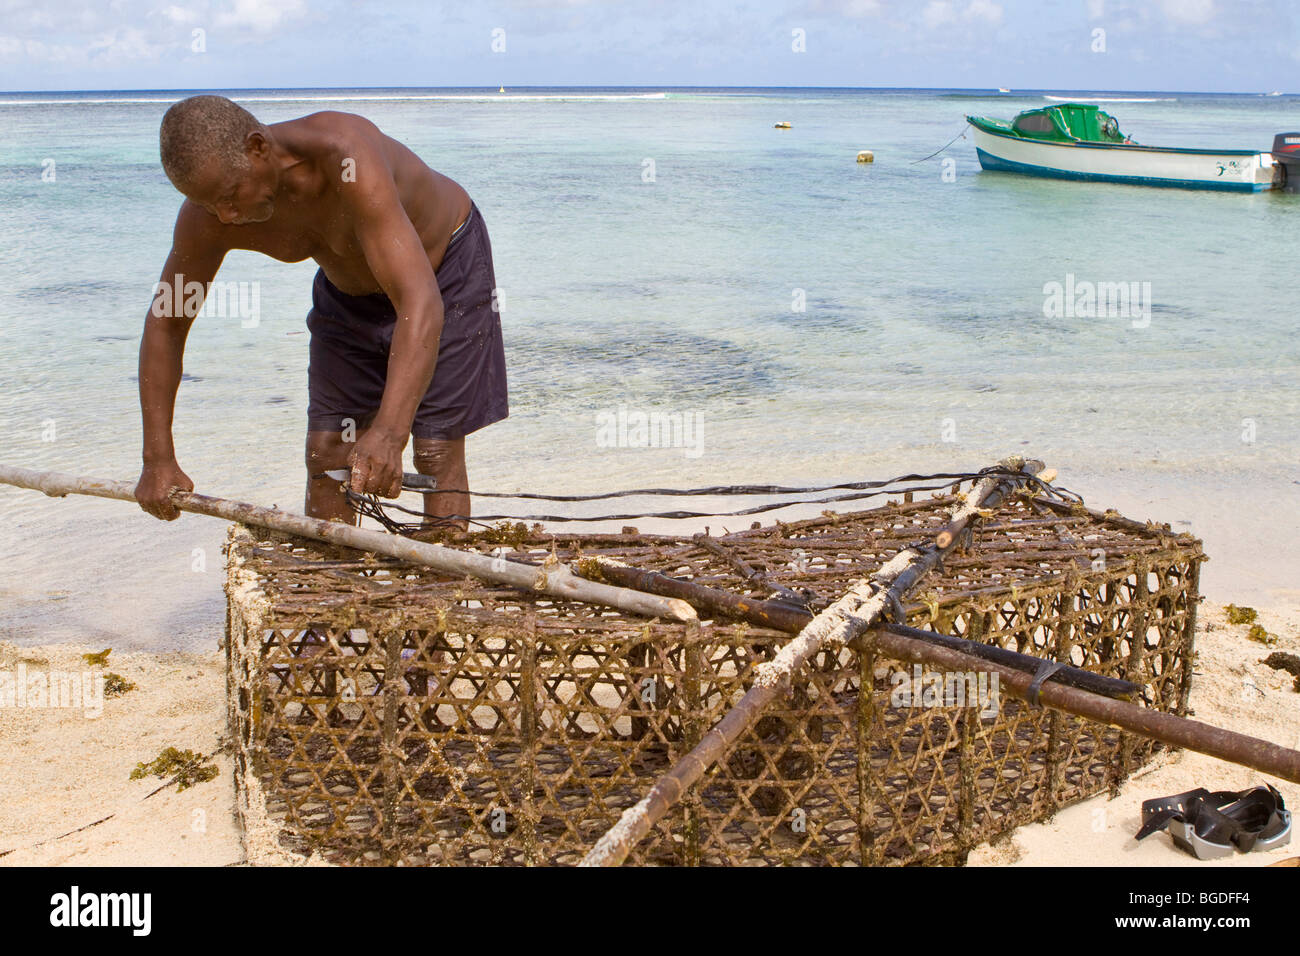 Fisherman, Creole, with bow net, Anse Forbans, island of Mahe, Seychelles, Africa, Indian Ocean Stock Photo